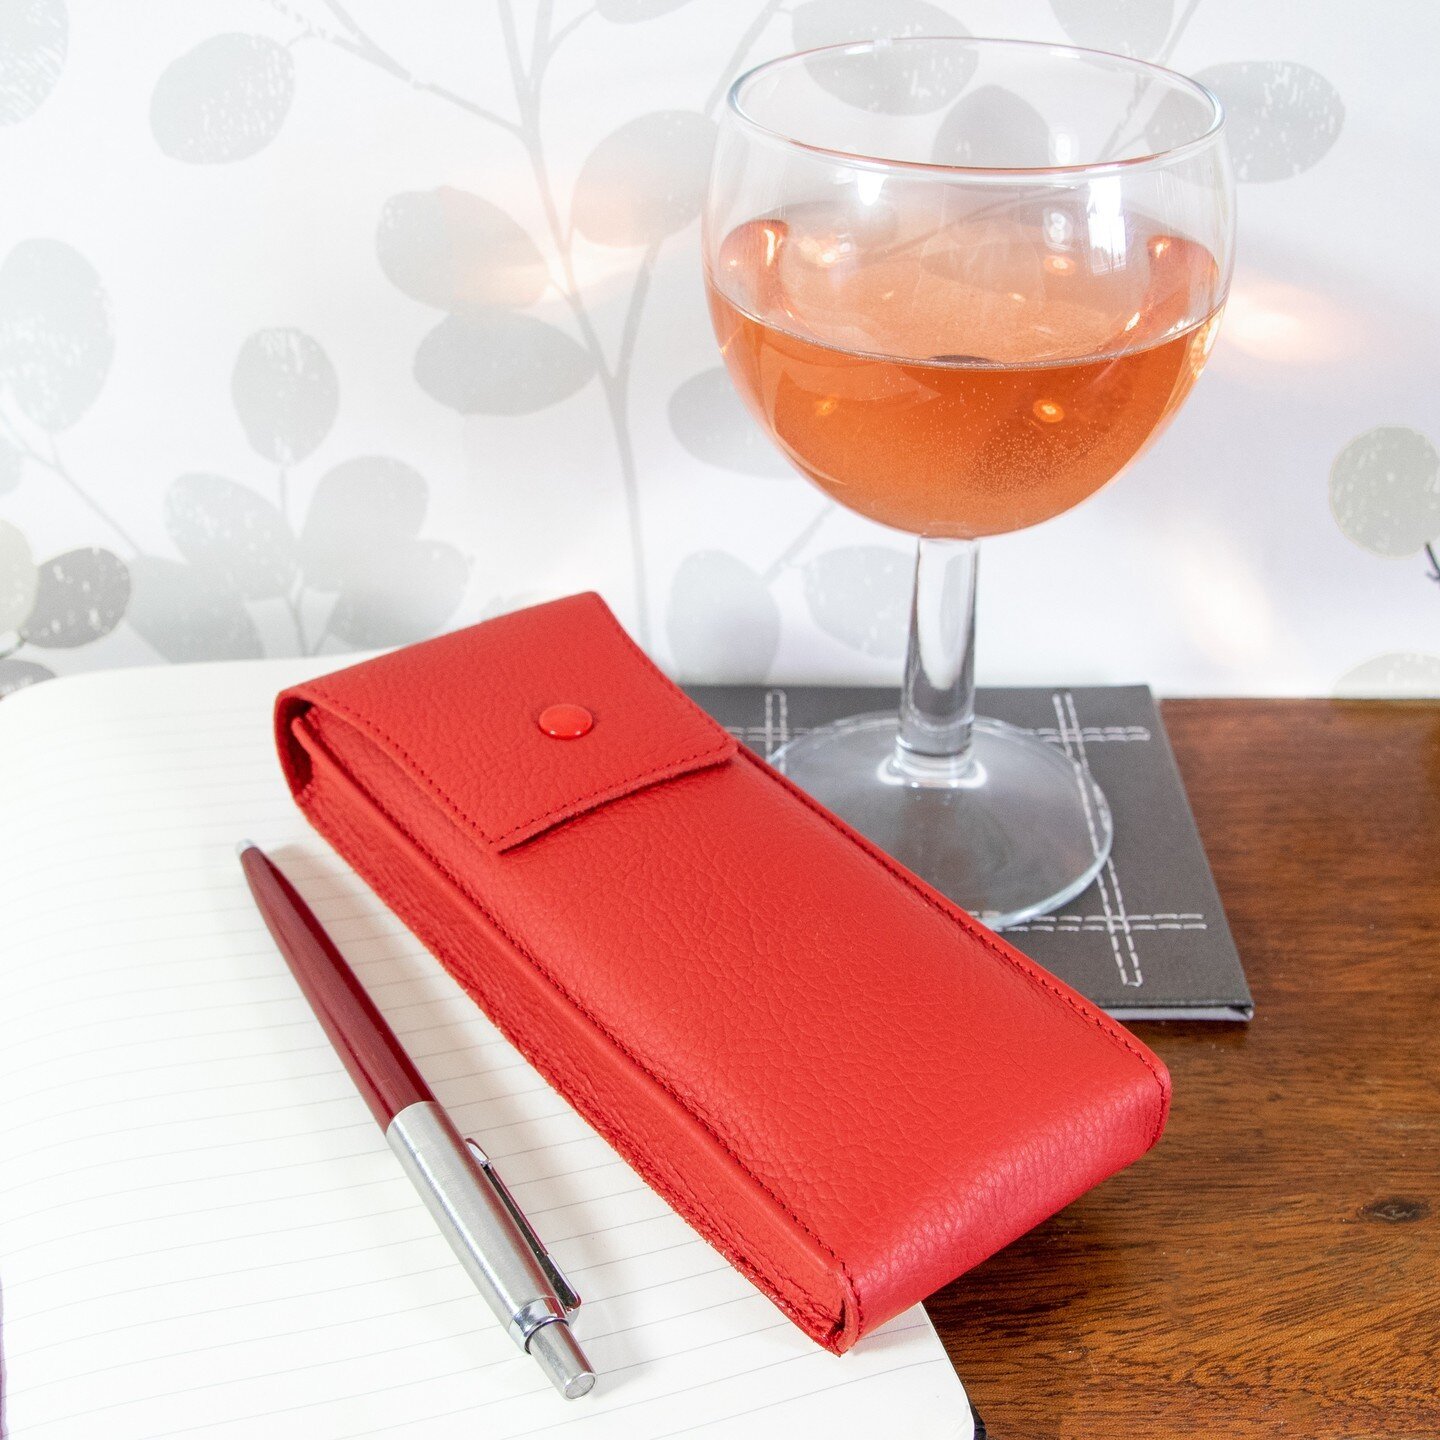 Wine O'clock? 🍷⁠
⁠
It's time to treat yourself! Get this luxurious leather case for protecting your beloved readers.⁠
⁠
Made from genuine Italian leather with a stitched edge detail.⁠
⁠
Available in 4 vibrant colours - red, yellow, navy and lime gre